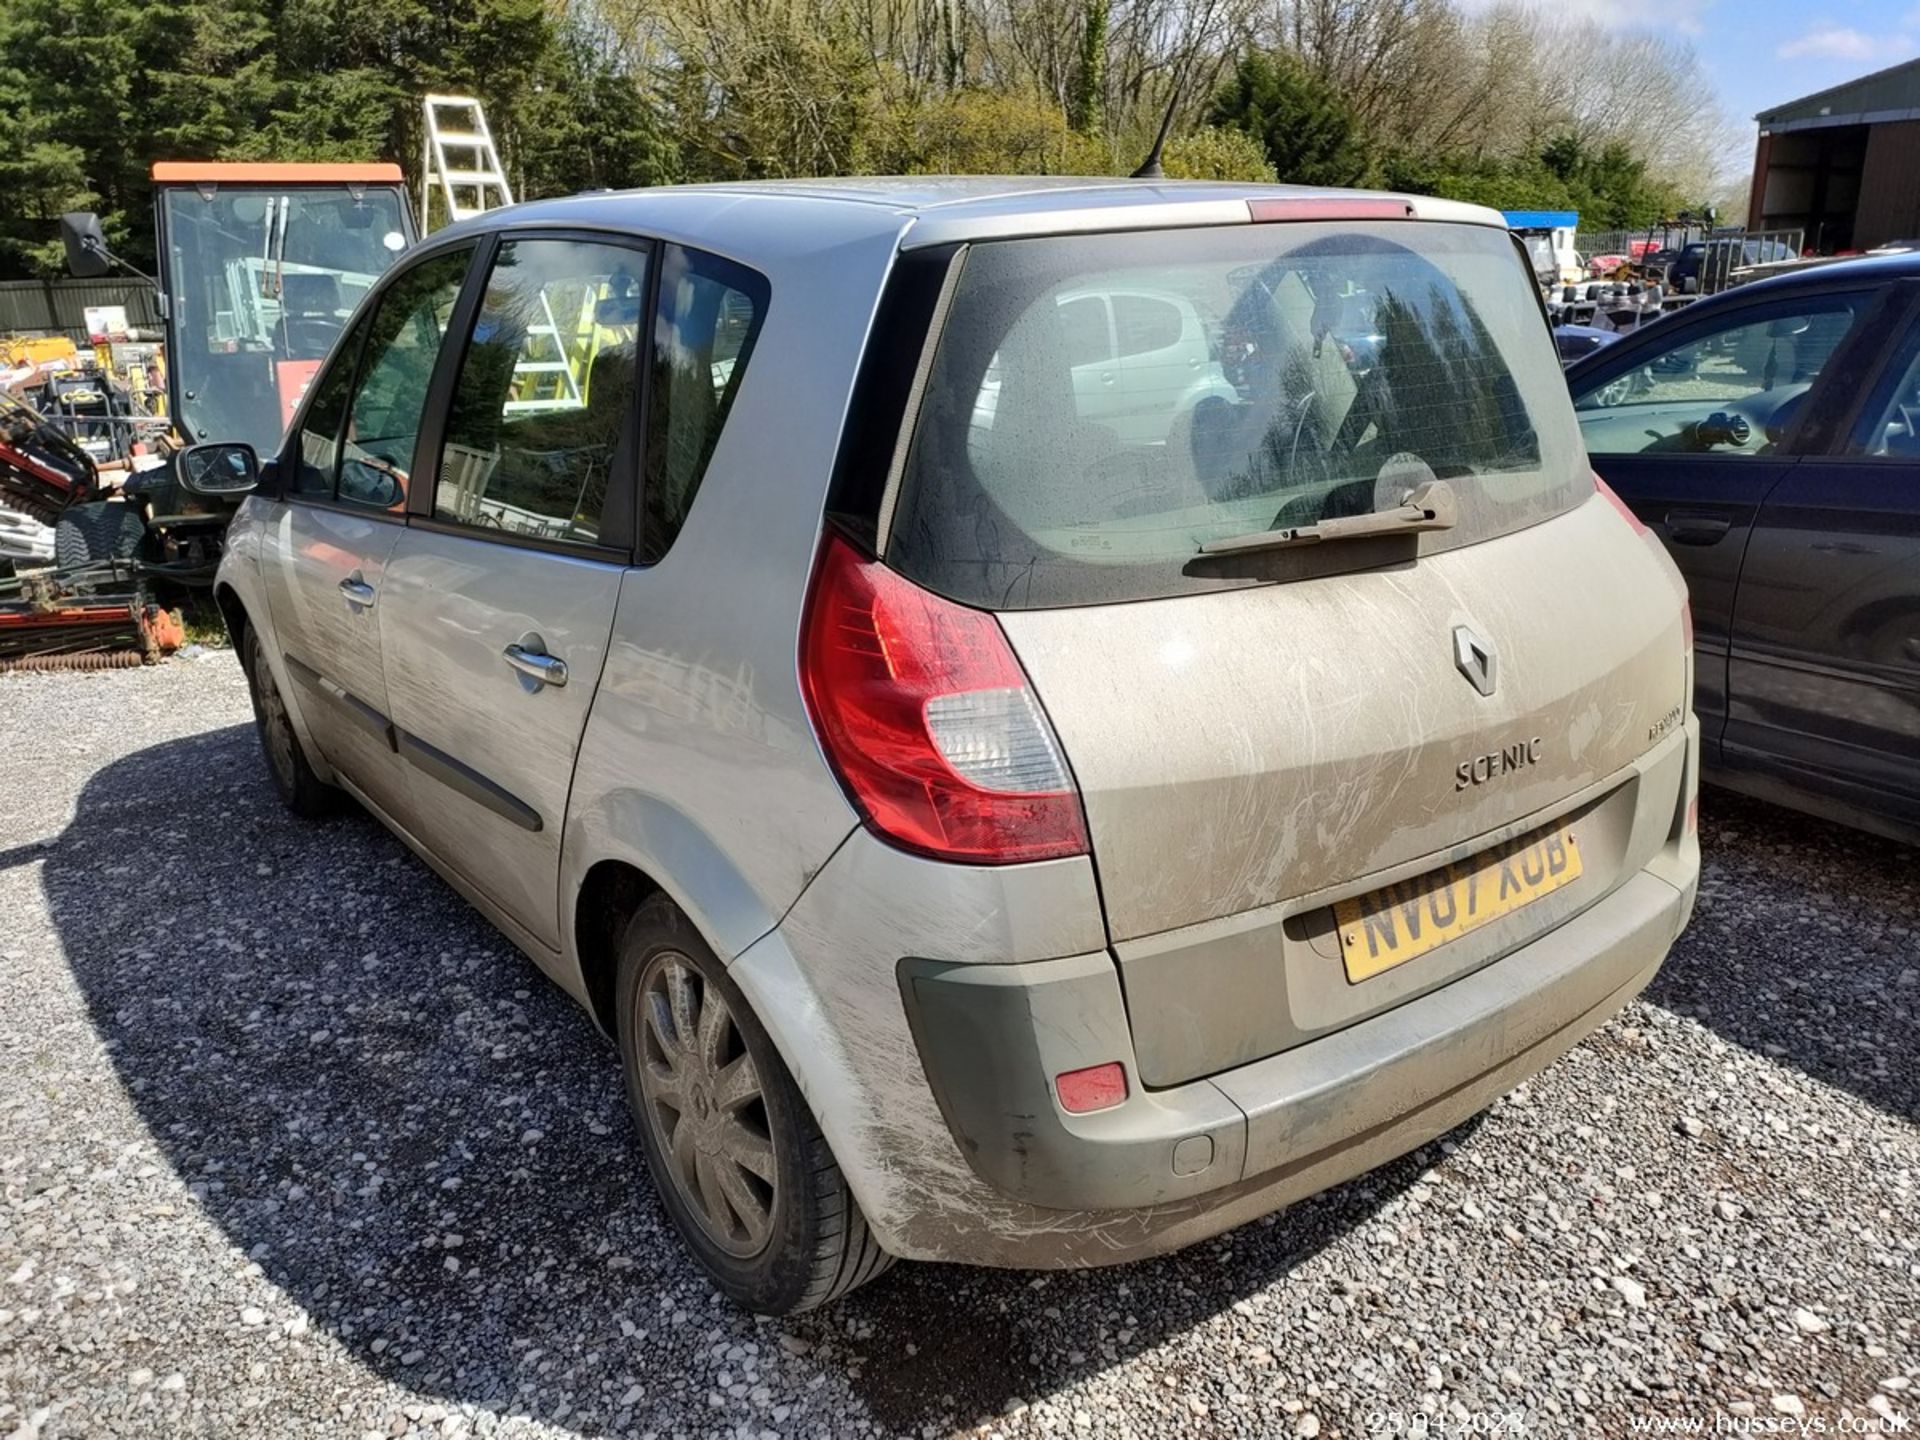 07/07 RENAULT SCENIC DYN VVT - 1598cc 5dr MPV (Silver) - Image 15 of 34